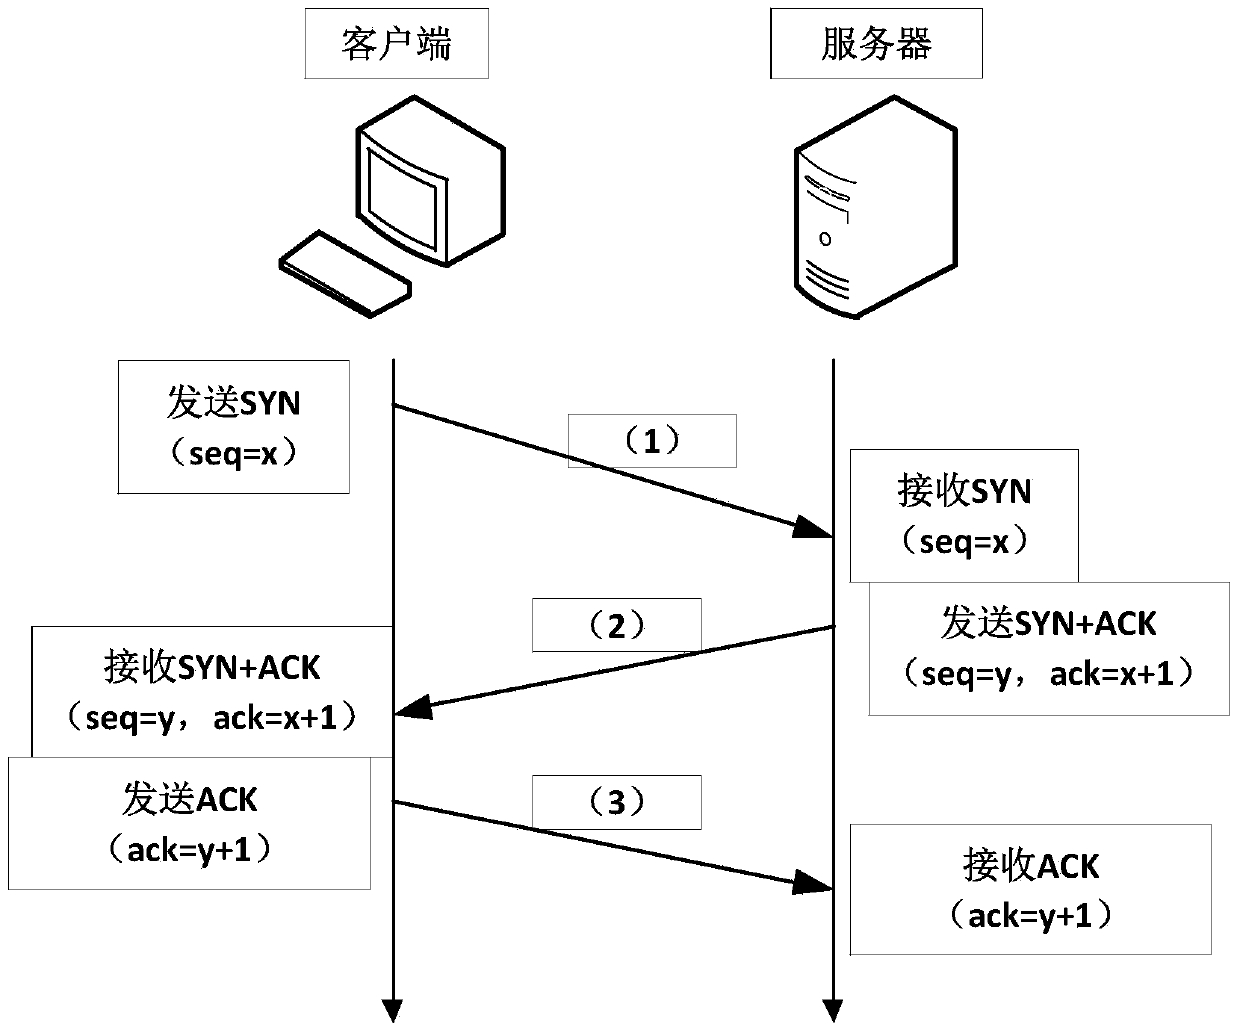 Counterfeit TCP covert communication method based on SYN-ACK dual-server rebound pattern